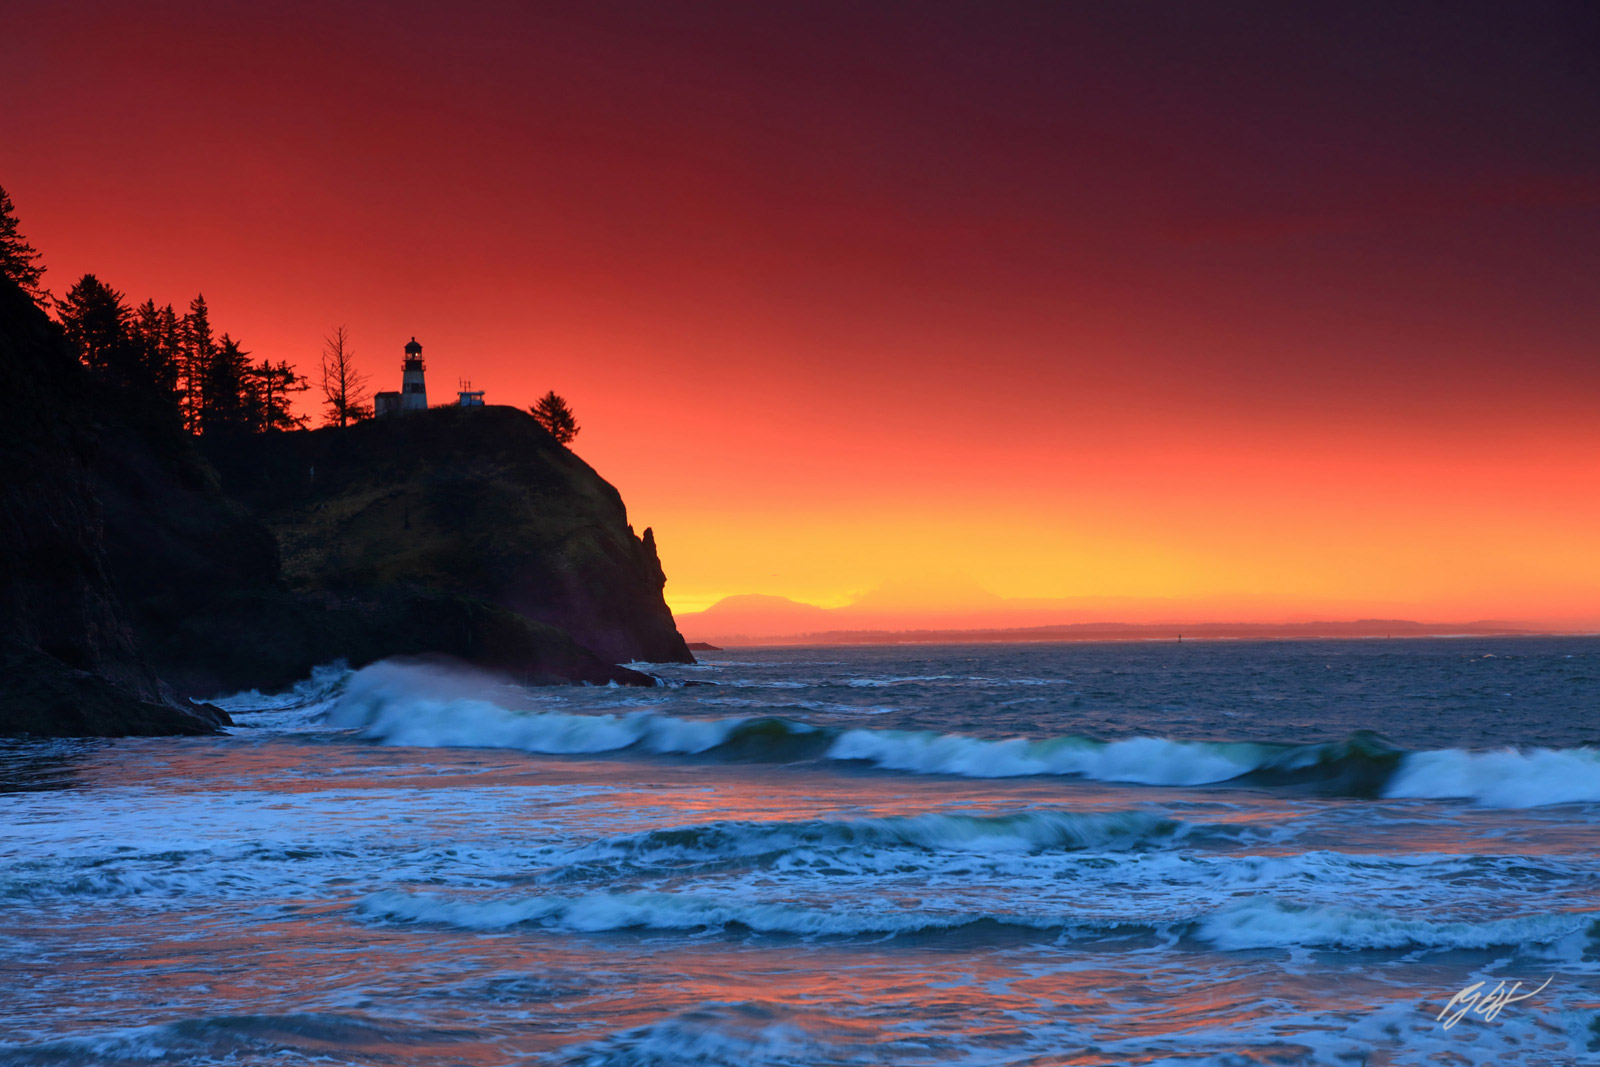 Sunrise With the Cape Disappointment Lighthouse in Cape Disappointment State Park in Washington